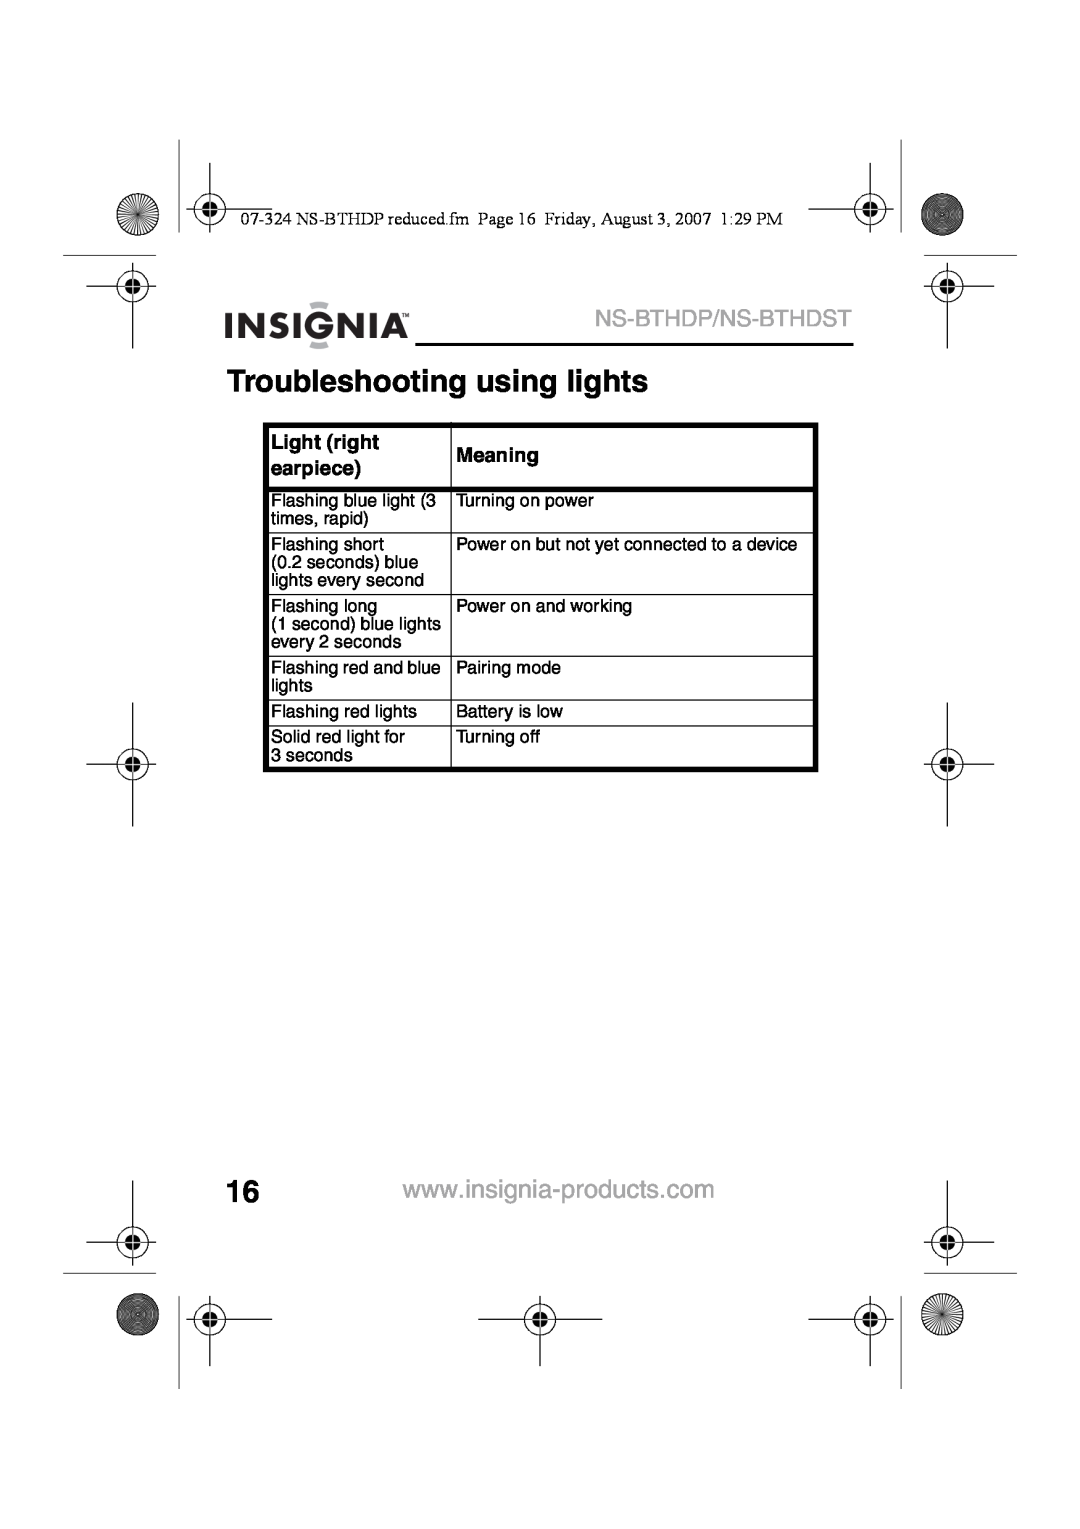 Insignia NS-BTHDST manual Troubleshooting using lights, Ns-Bthdp/Ns-Bthdst, Light right, Meaning, earpiece 